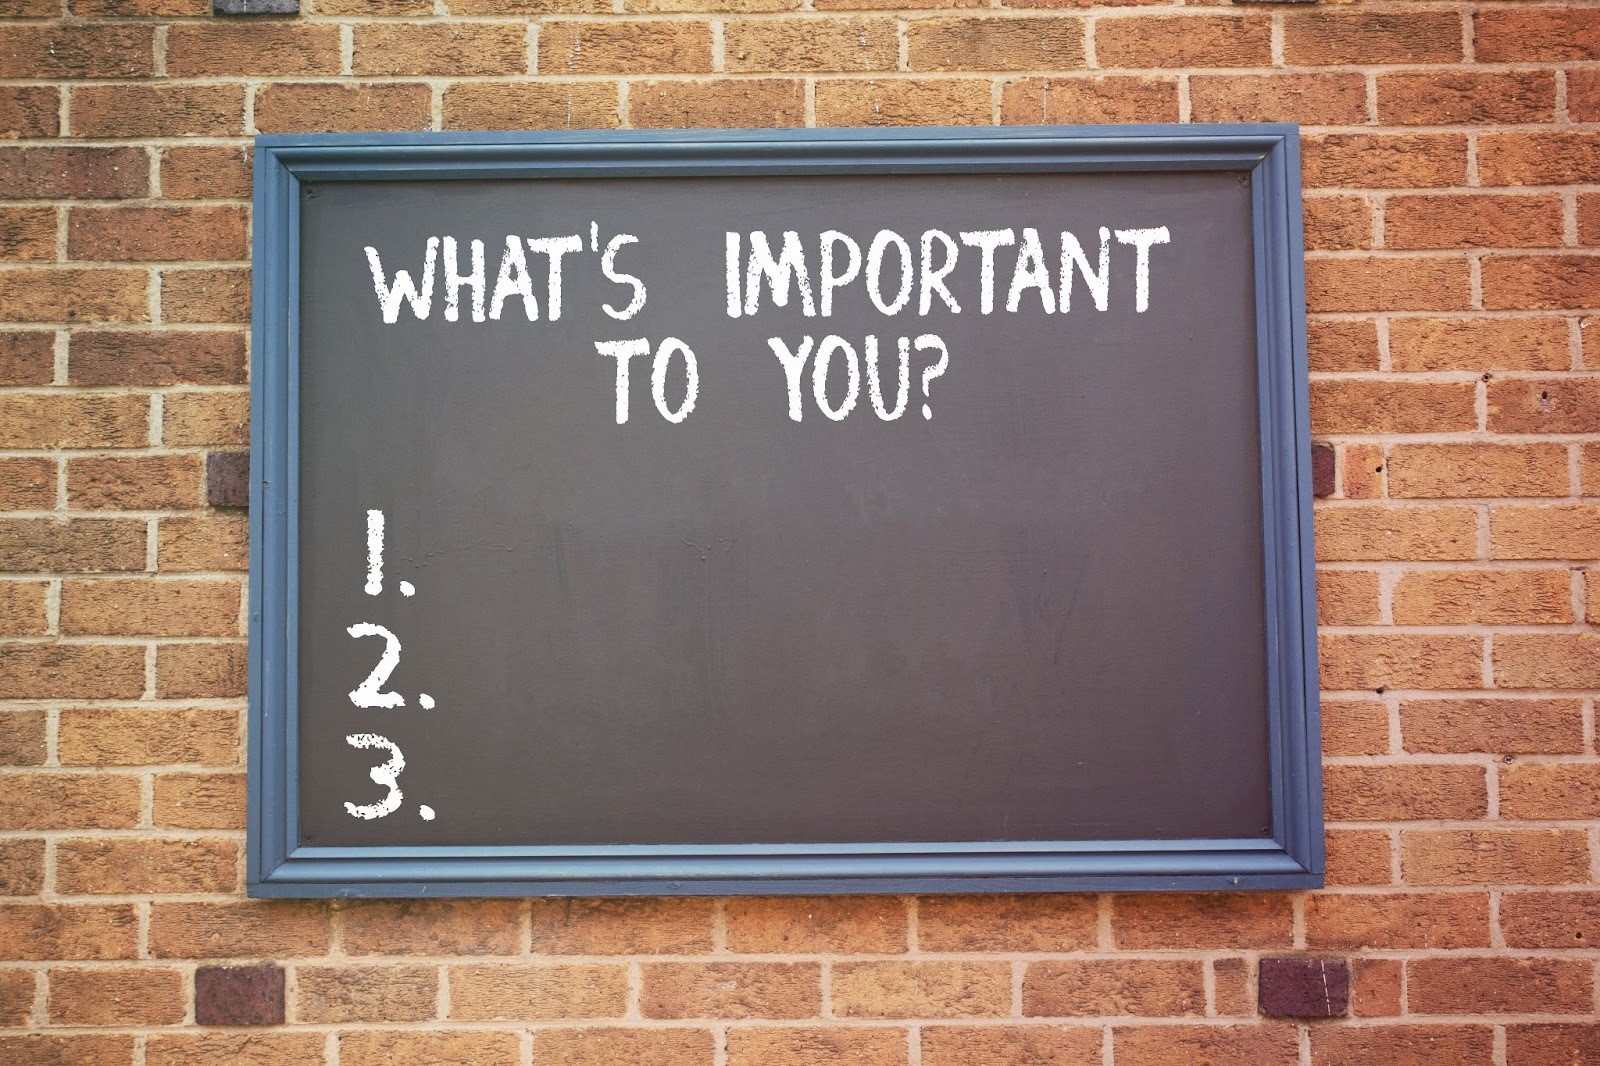 What's Important to You? Hub Reader Survey